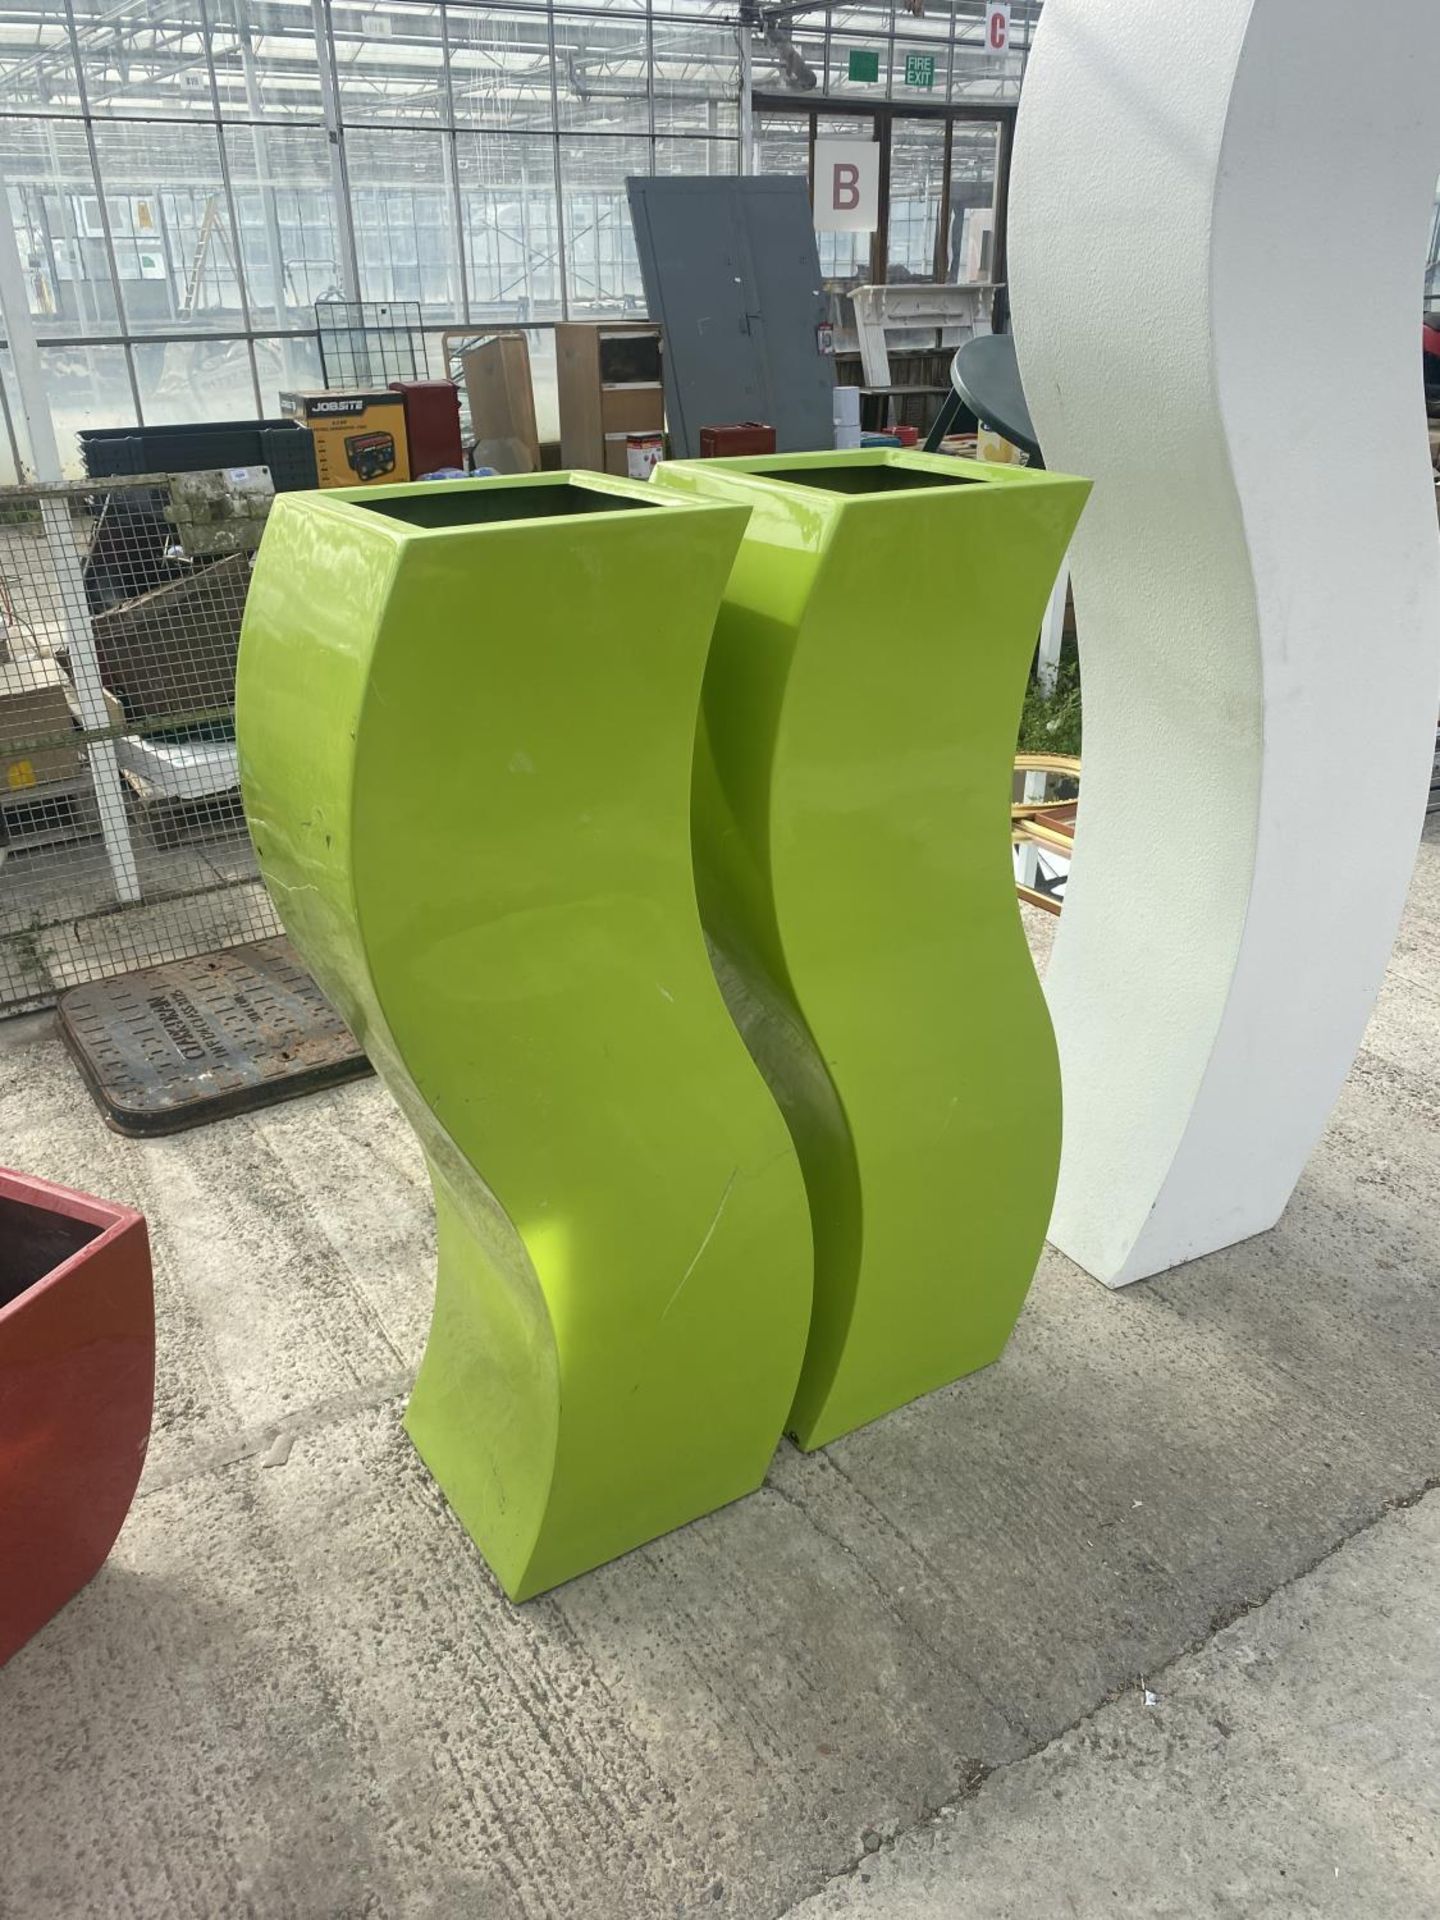 A PAIR OF UNUSUAL TALL AND CURVED DECORATIVE GREEN PLASTIC PLANTERS (H:120CM)